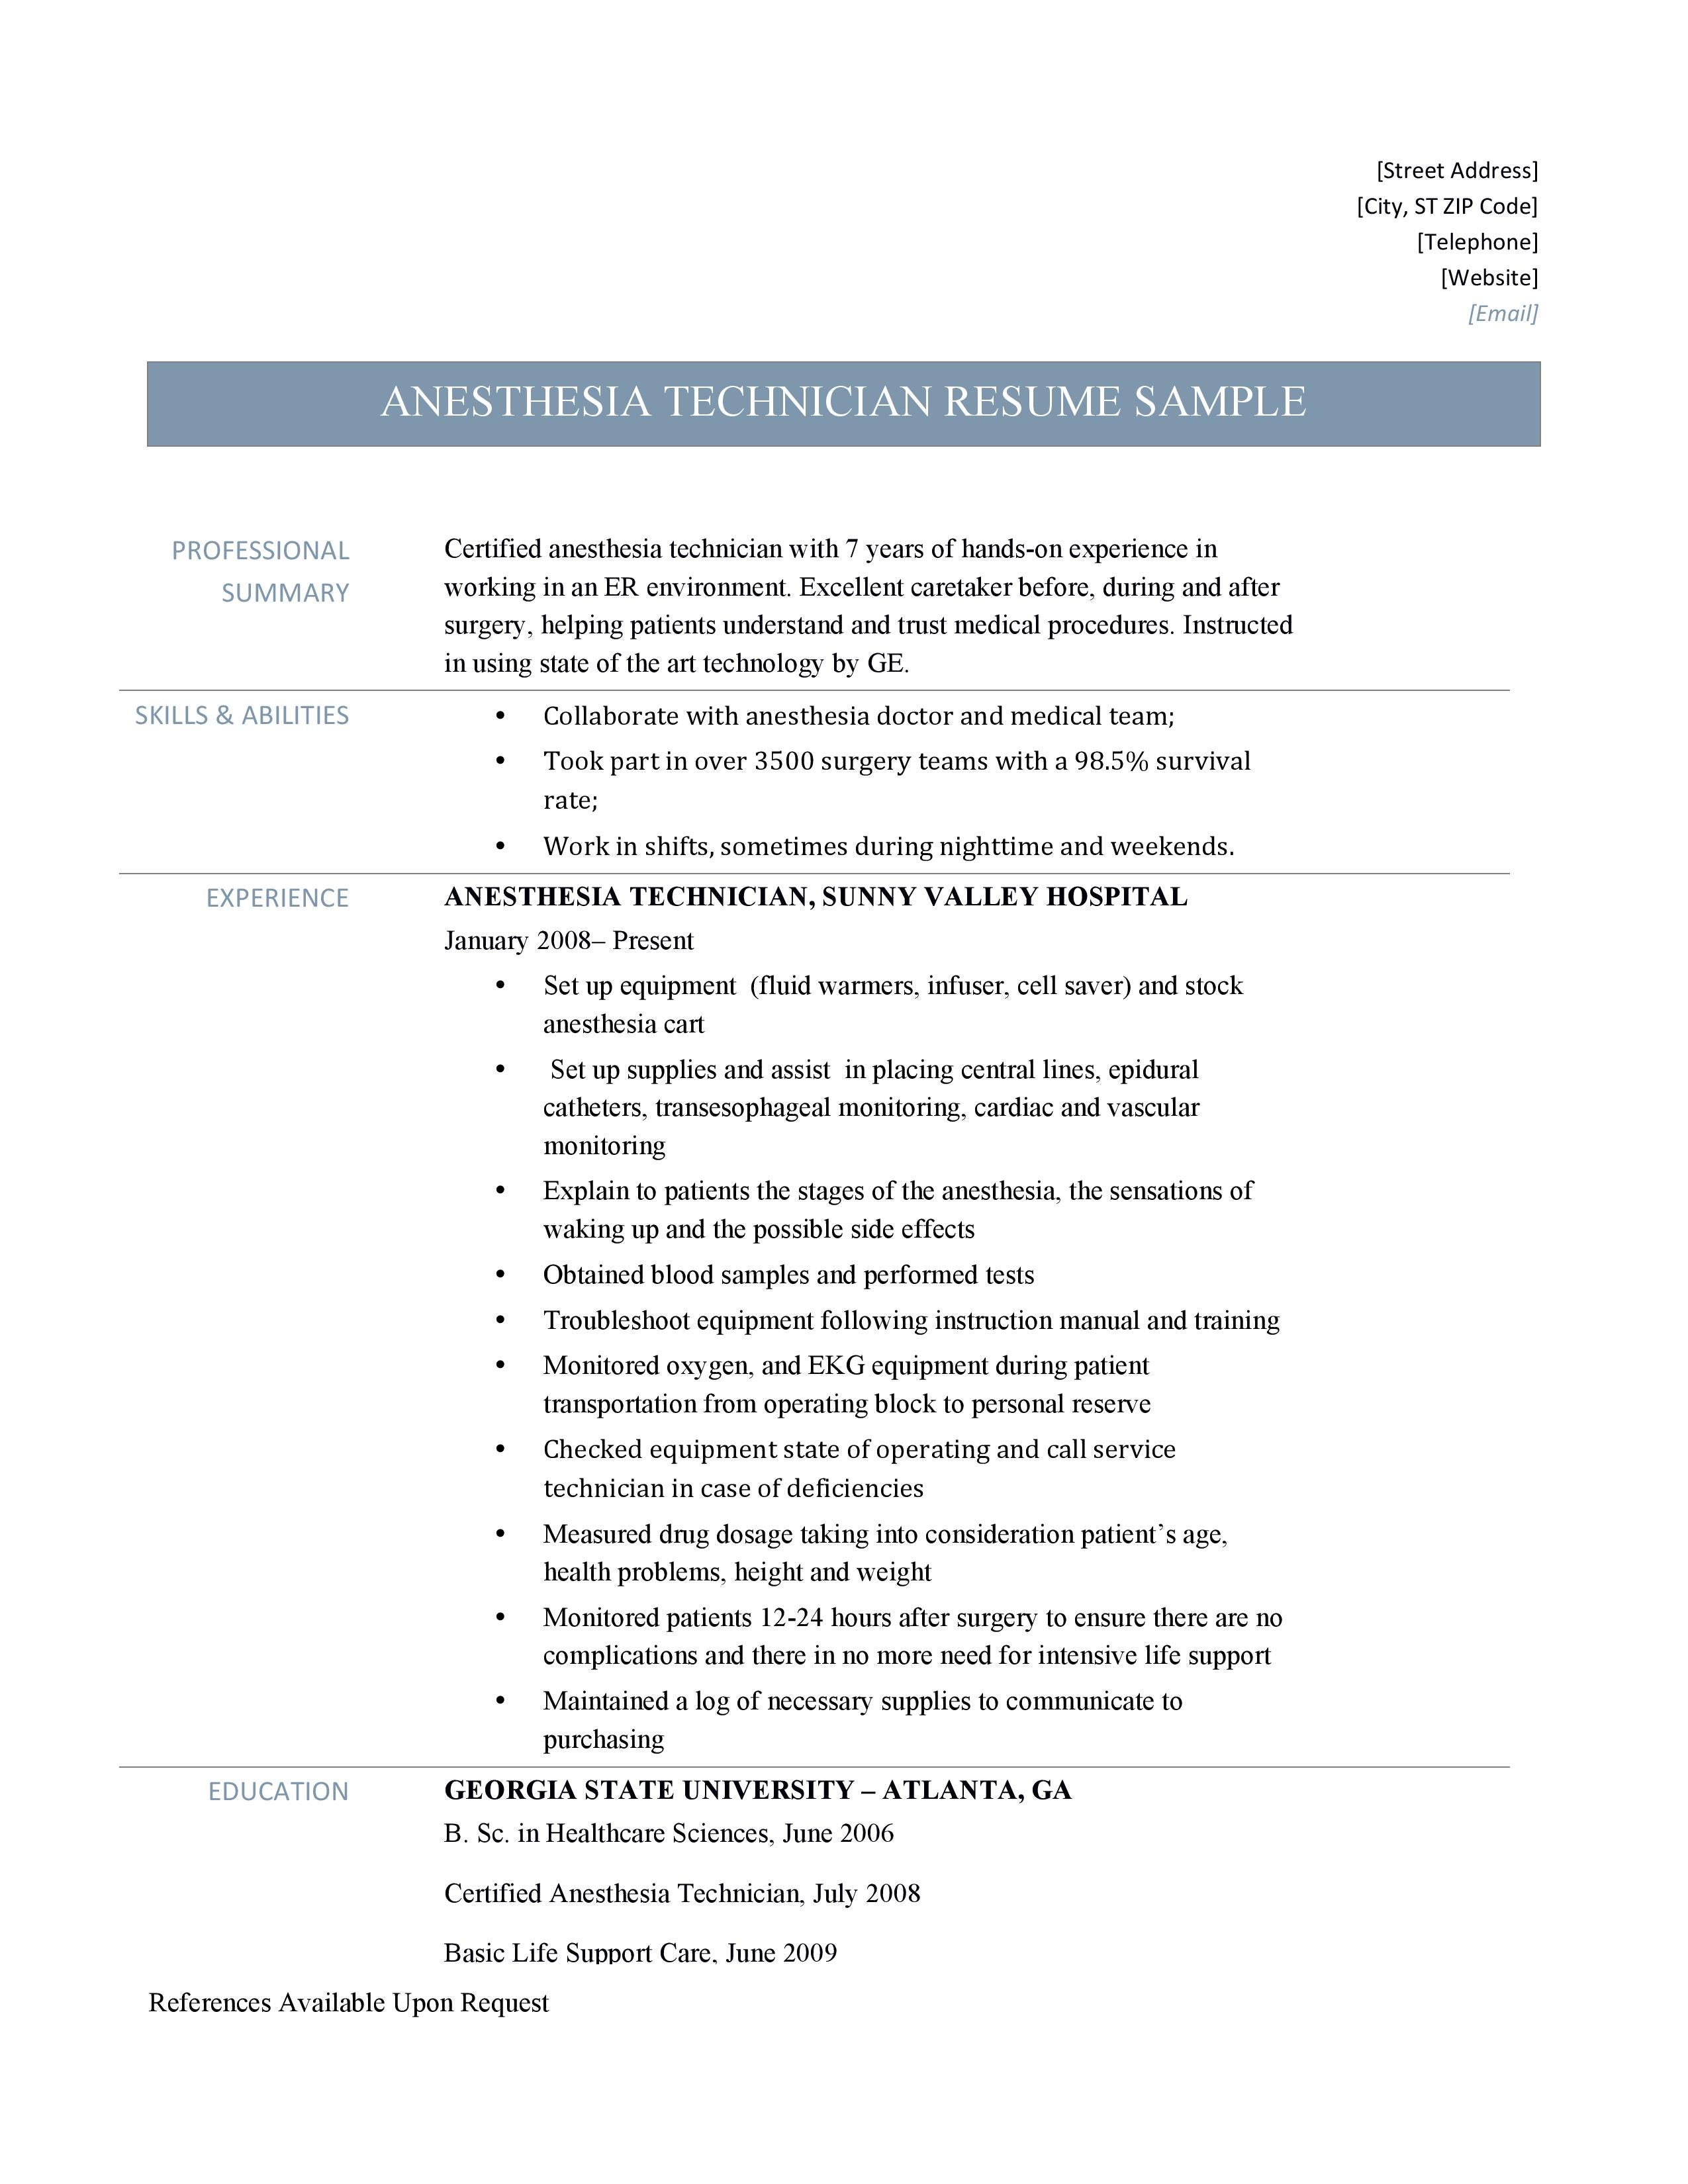 Anesthesia Technician Resume By Online Resume Builders Medium